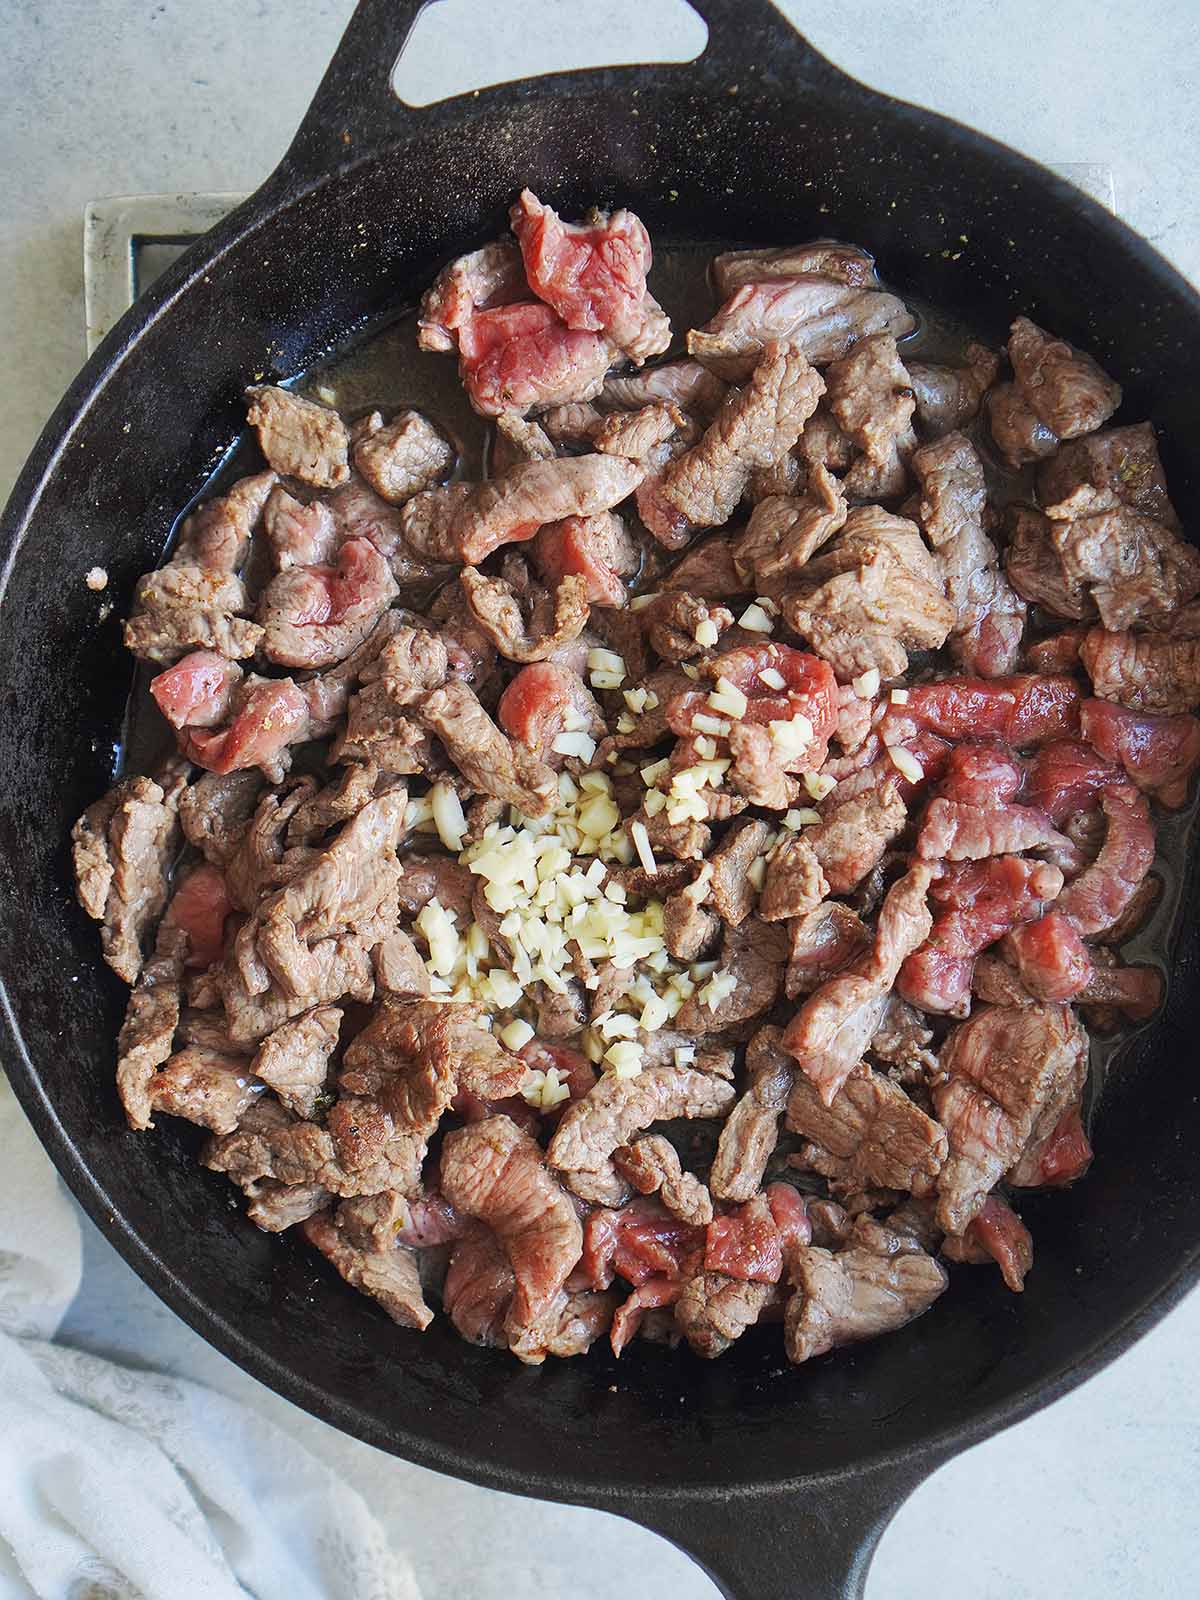 Cooking steak with chopped garlic in a skillet.